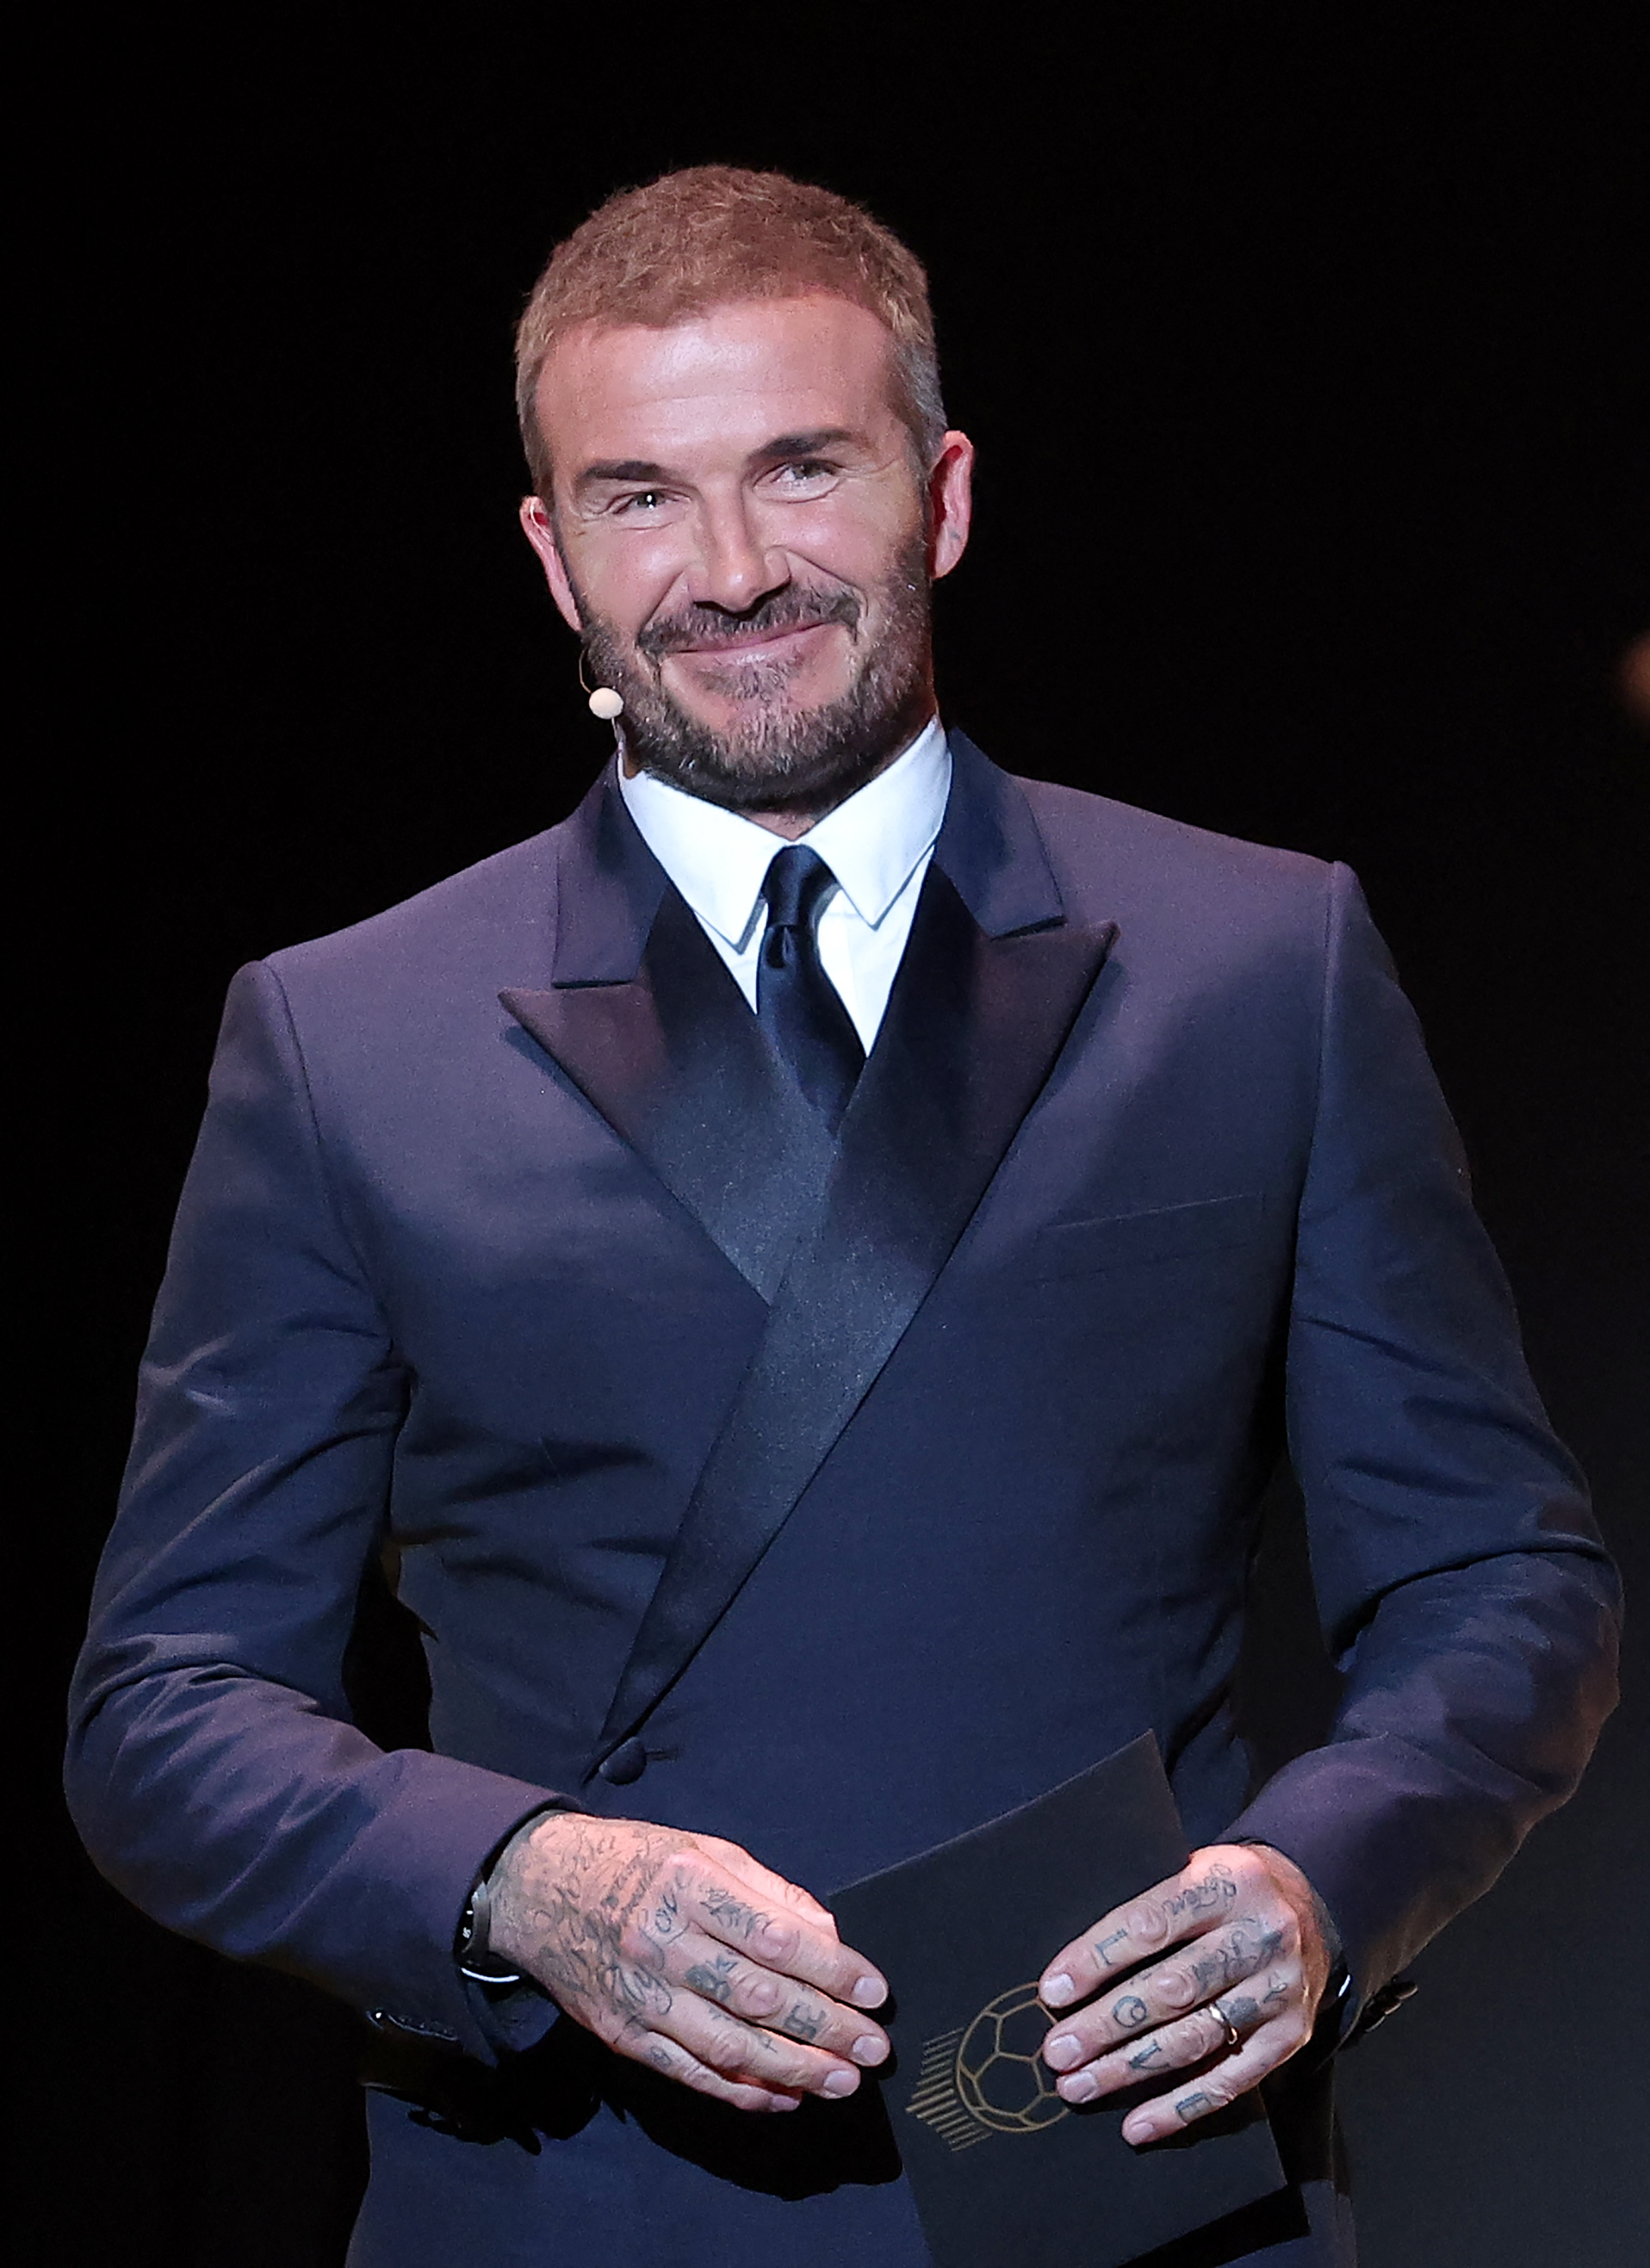 David Beckham during the 2023 Ballon d'Or France Football award ceremony at the Theatre du Chatelet in Paris on October 30, 2023. | Source: Getty Images